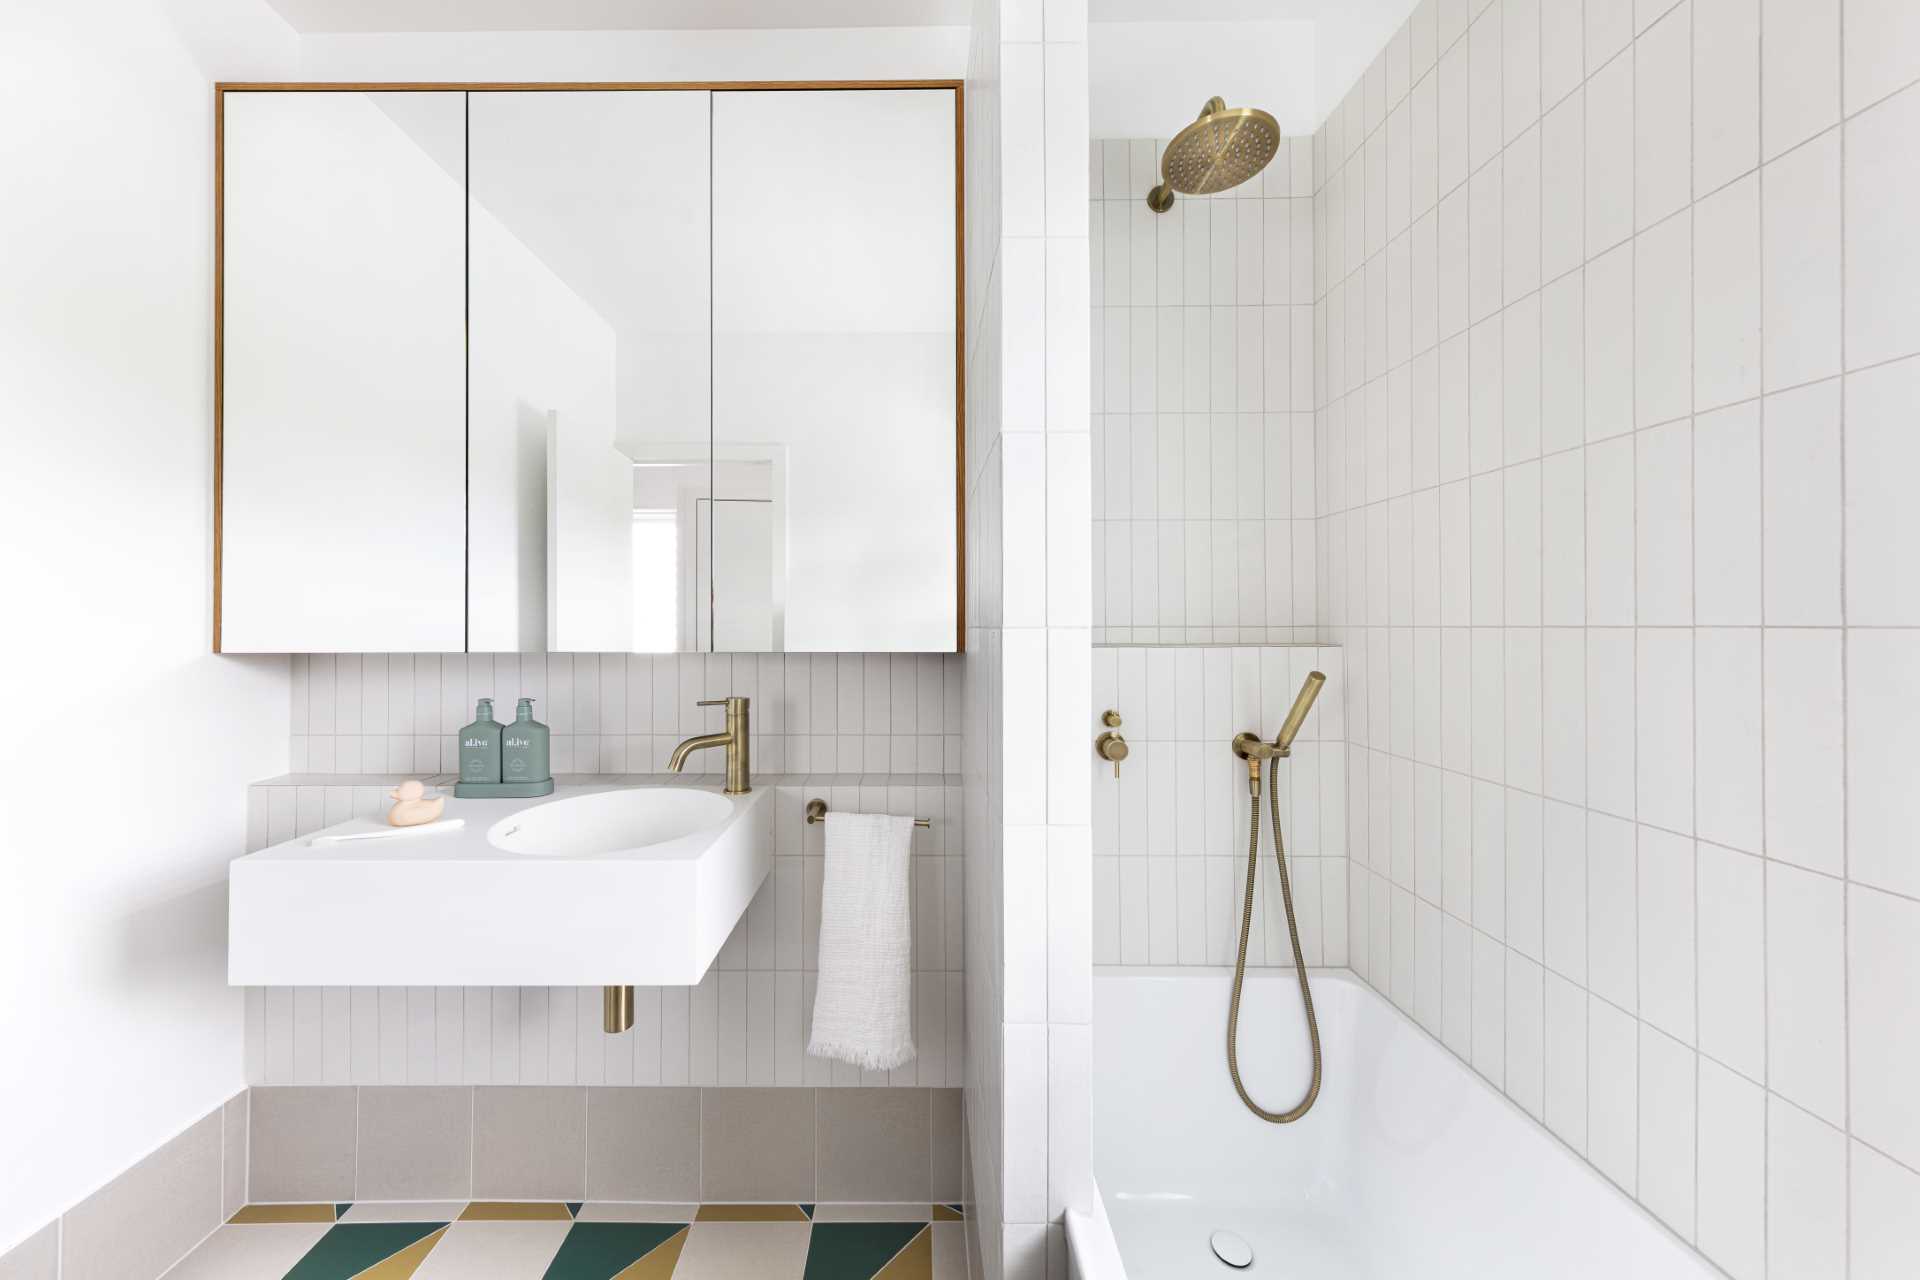 This kids bathroom has a neutral palette, however colorful floor tiles add a hint of fun.